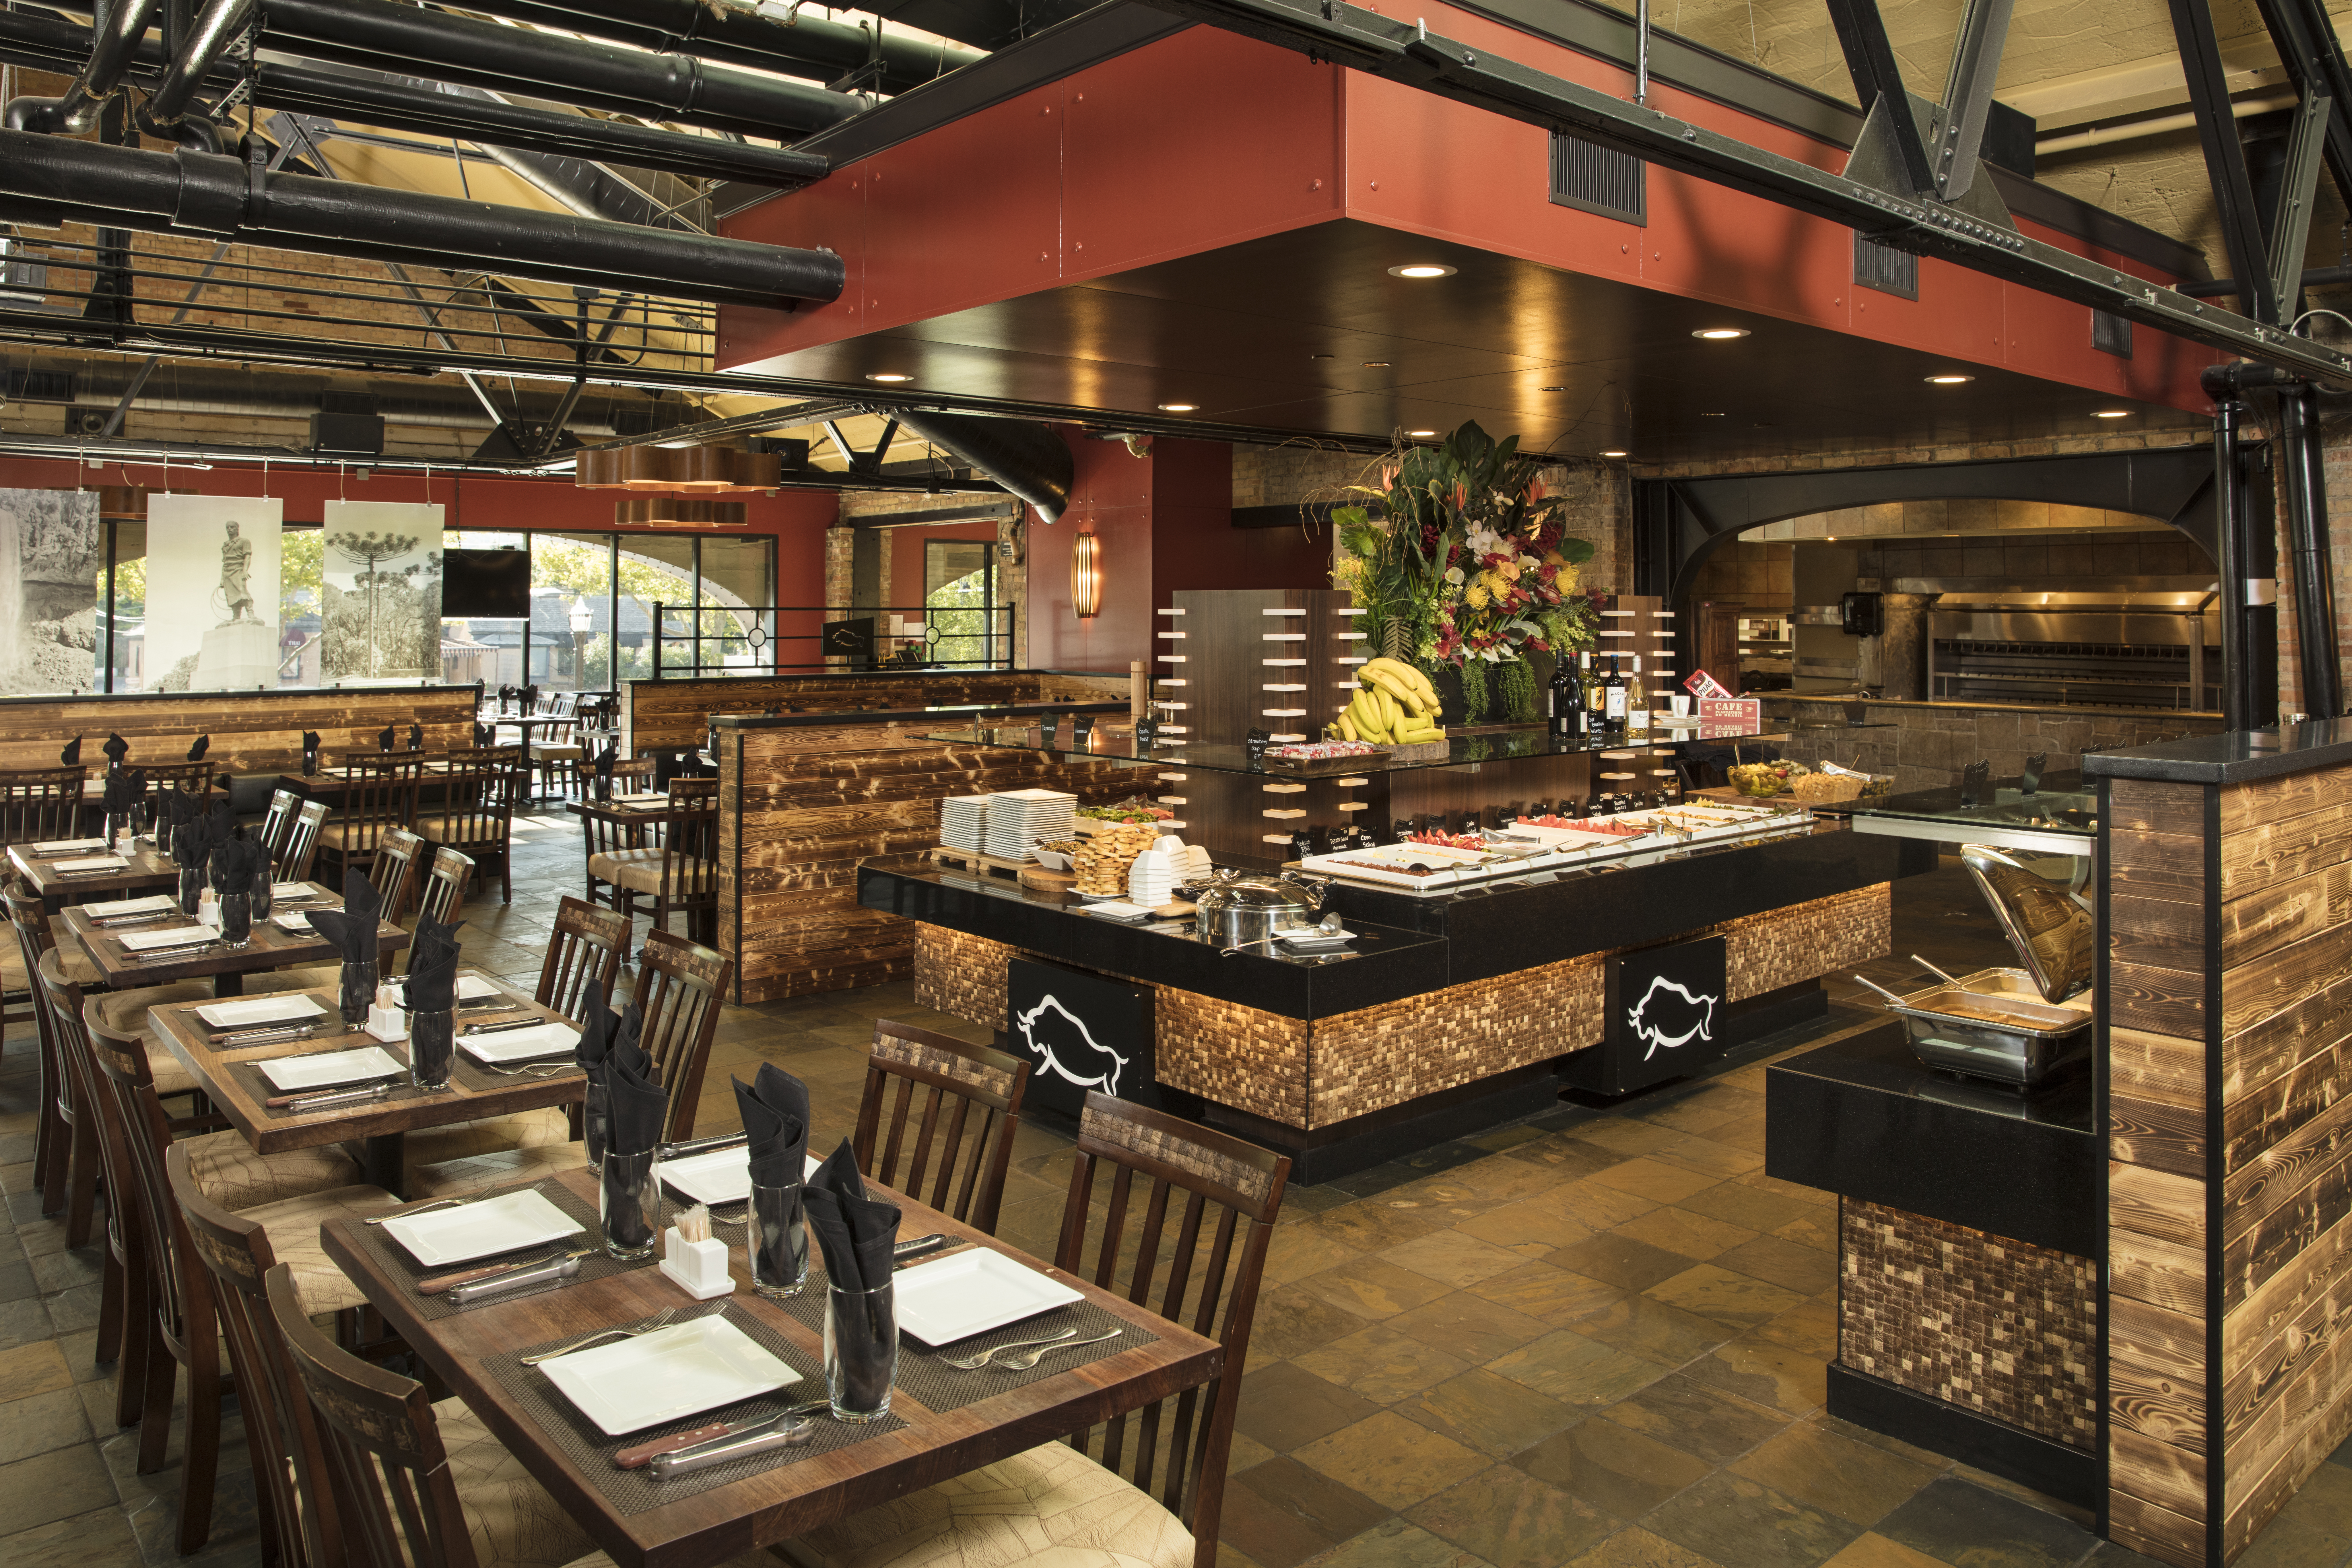 Rodizio Grill: A Gathering Place for Celebrating Life’s Milestones